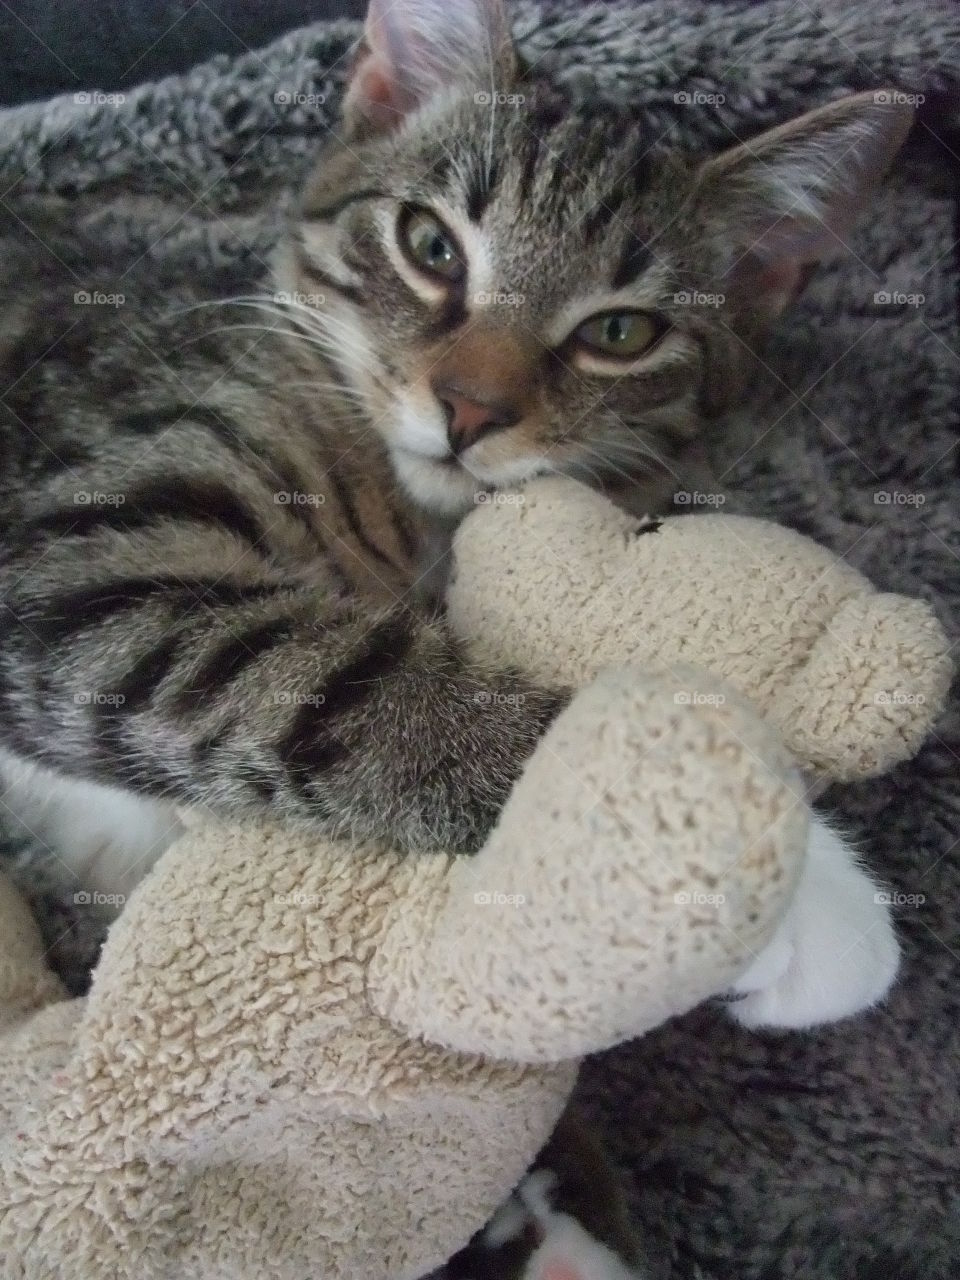 One of our three cats Leo cuddling a Mr Teddy. 
Leohad a rough start living outdoors and not being cared for. We have adopted all cats and they are adorable both to people and to each other. 😻😻😻😻😻